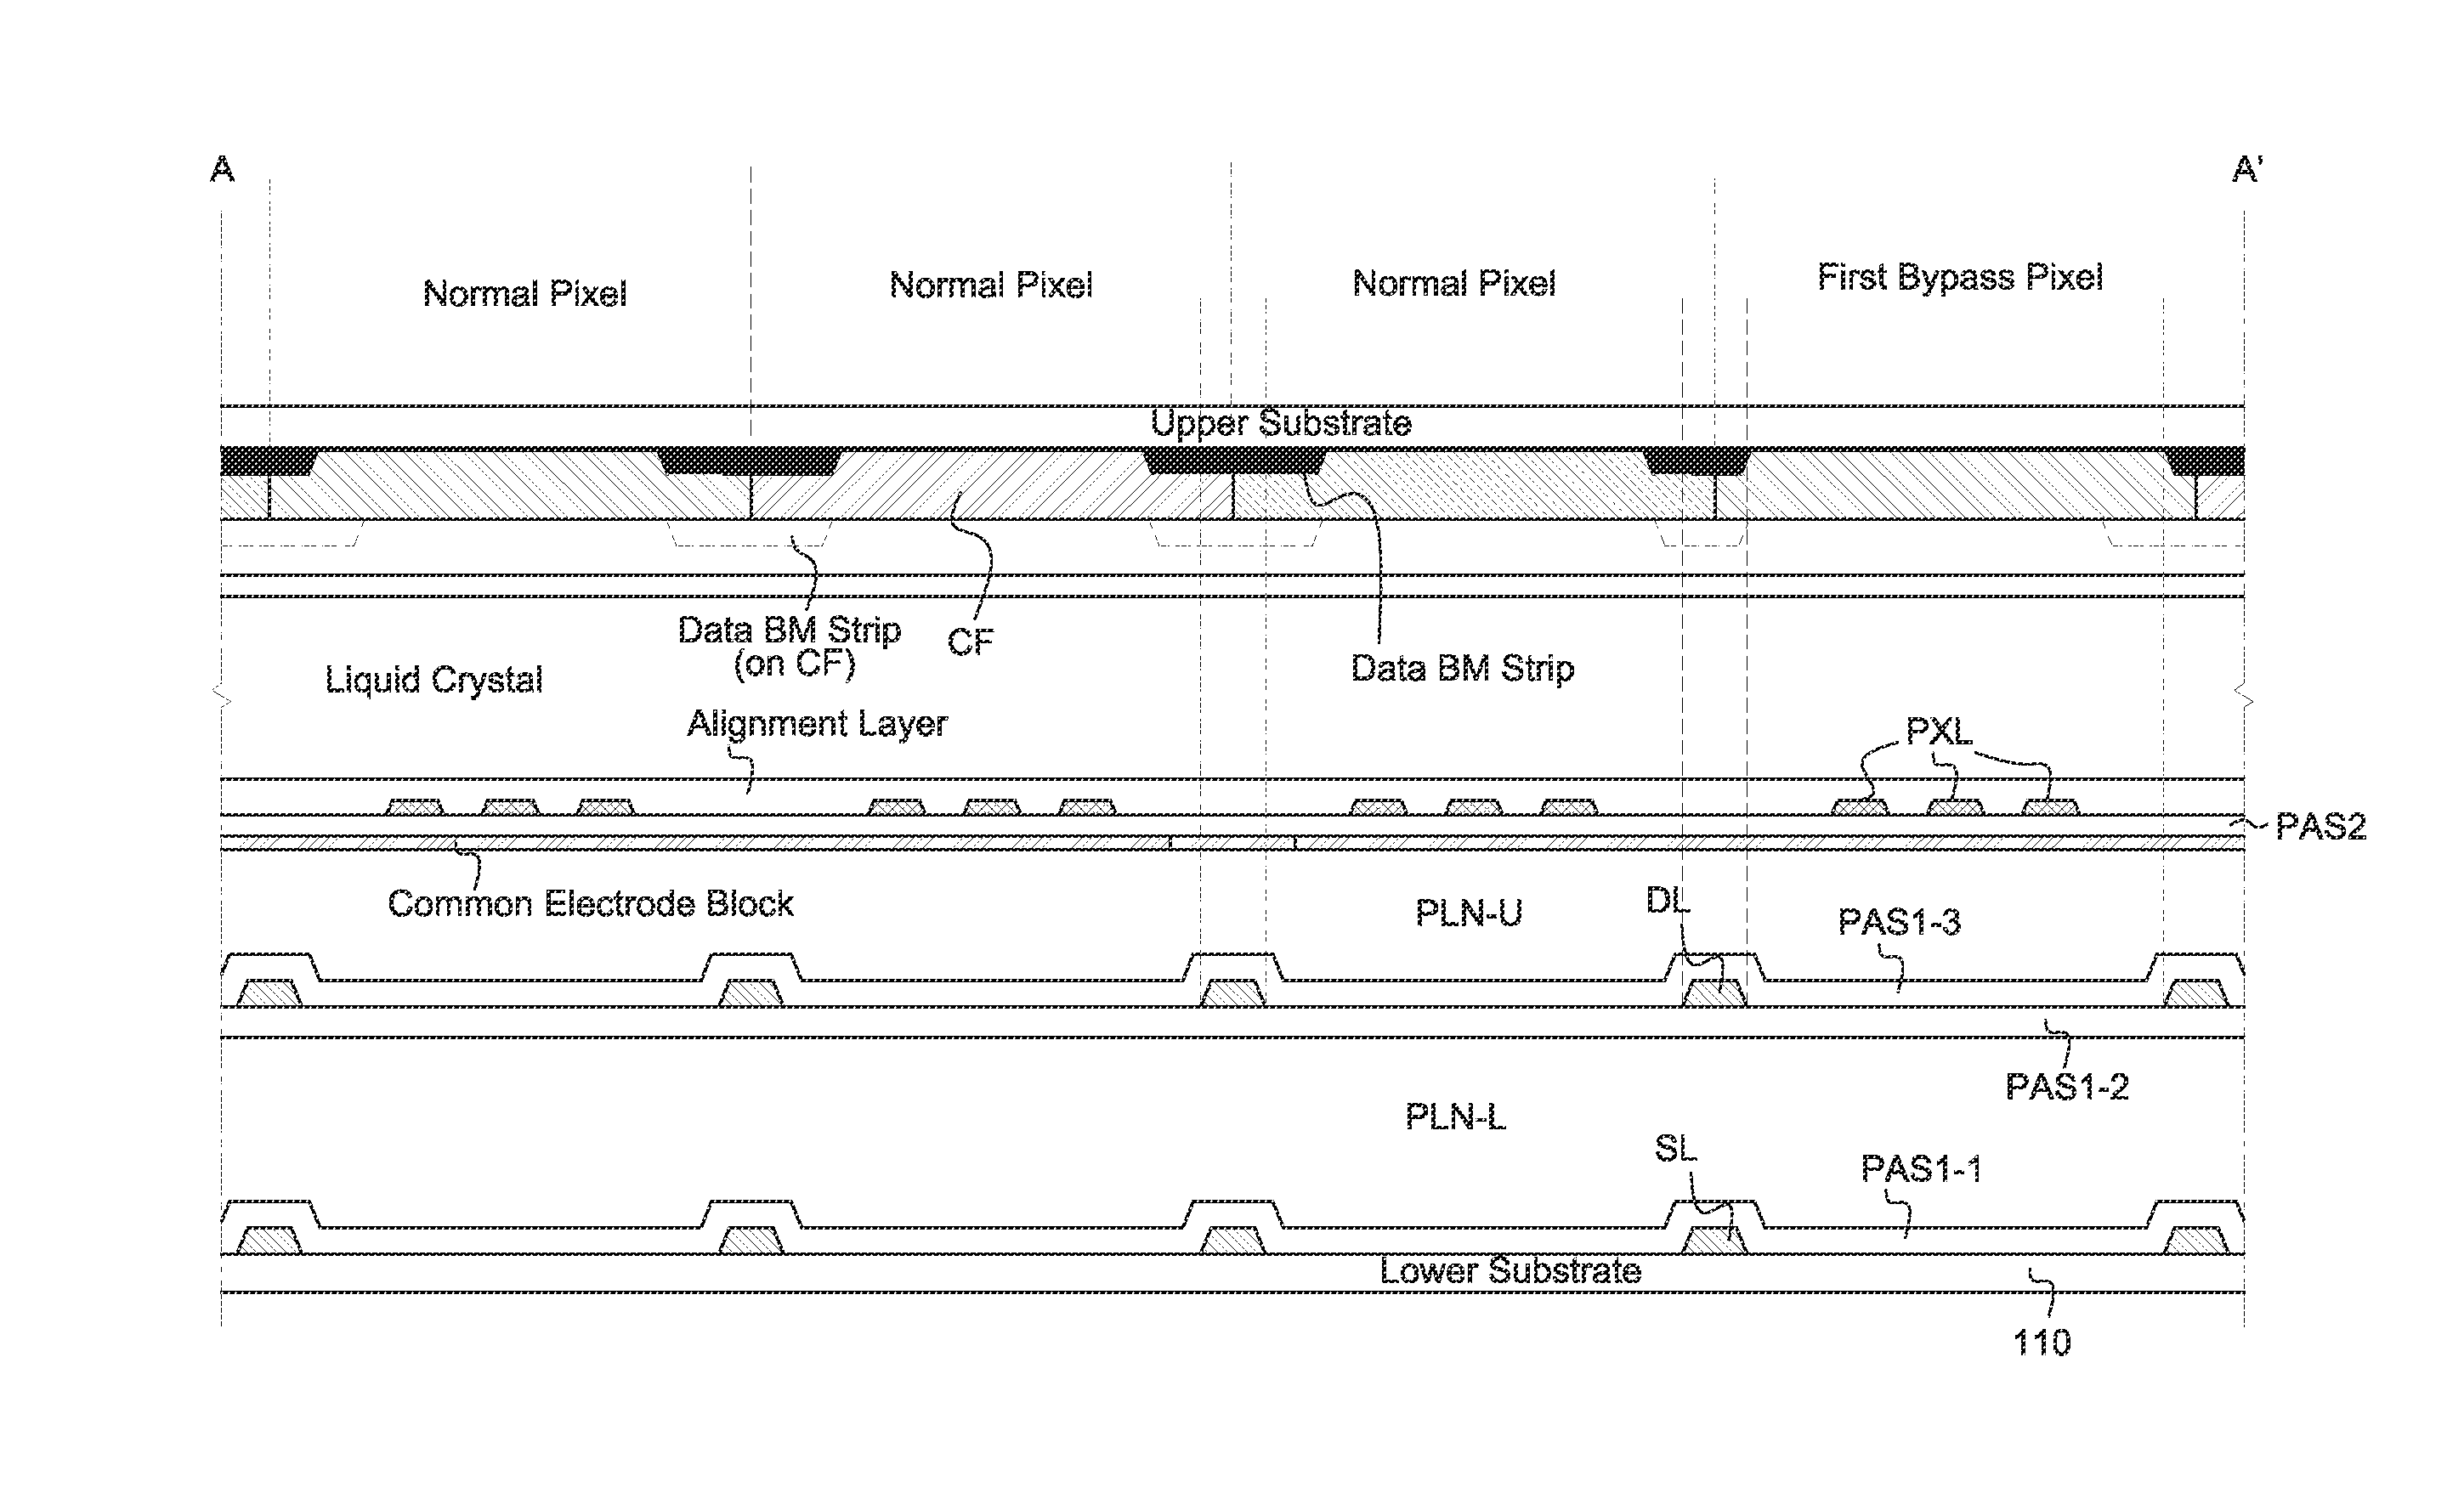 Display panel with external signal lines under gate drive circuit